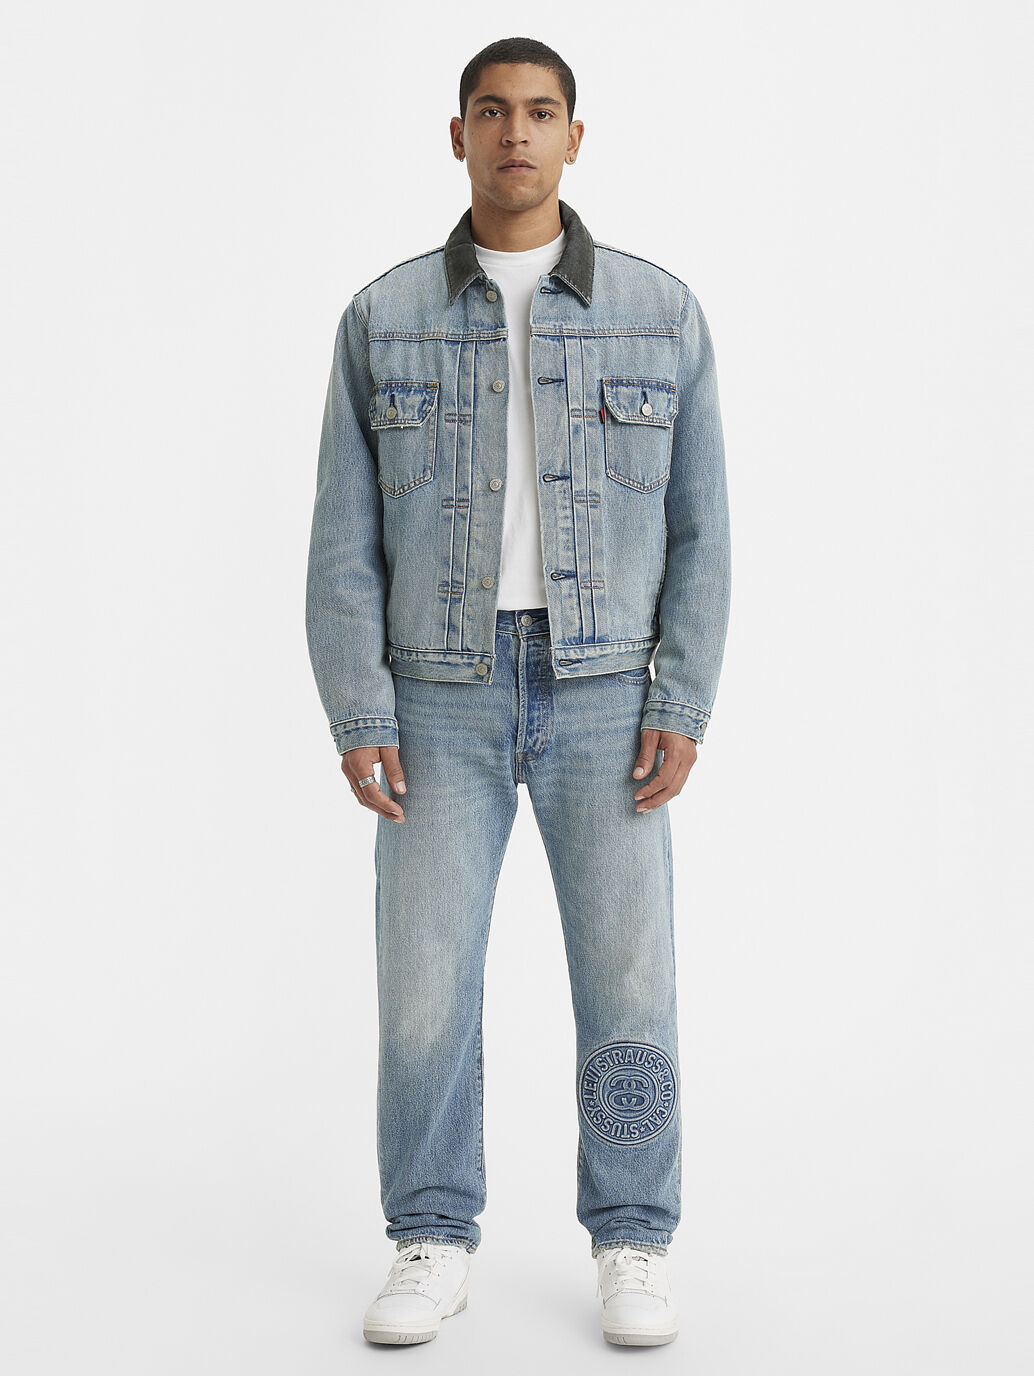 Stüssy & Levi's® Embossed 501® Jeans in STUSSY RUGGED BOTTOM ...